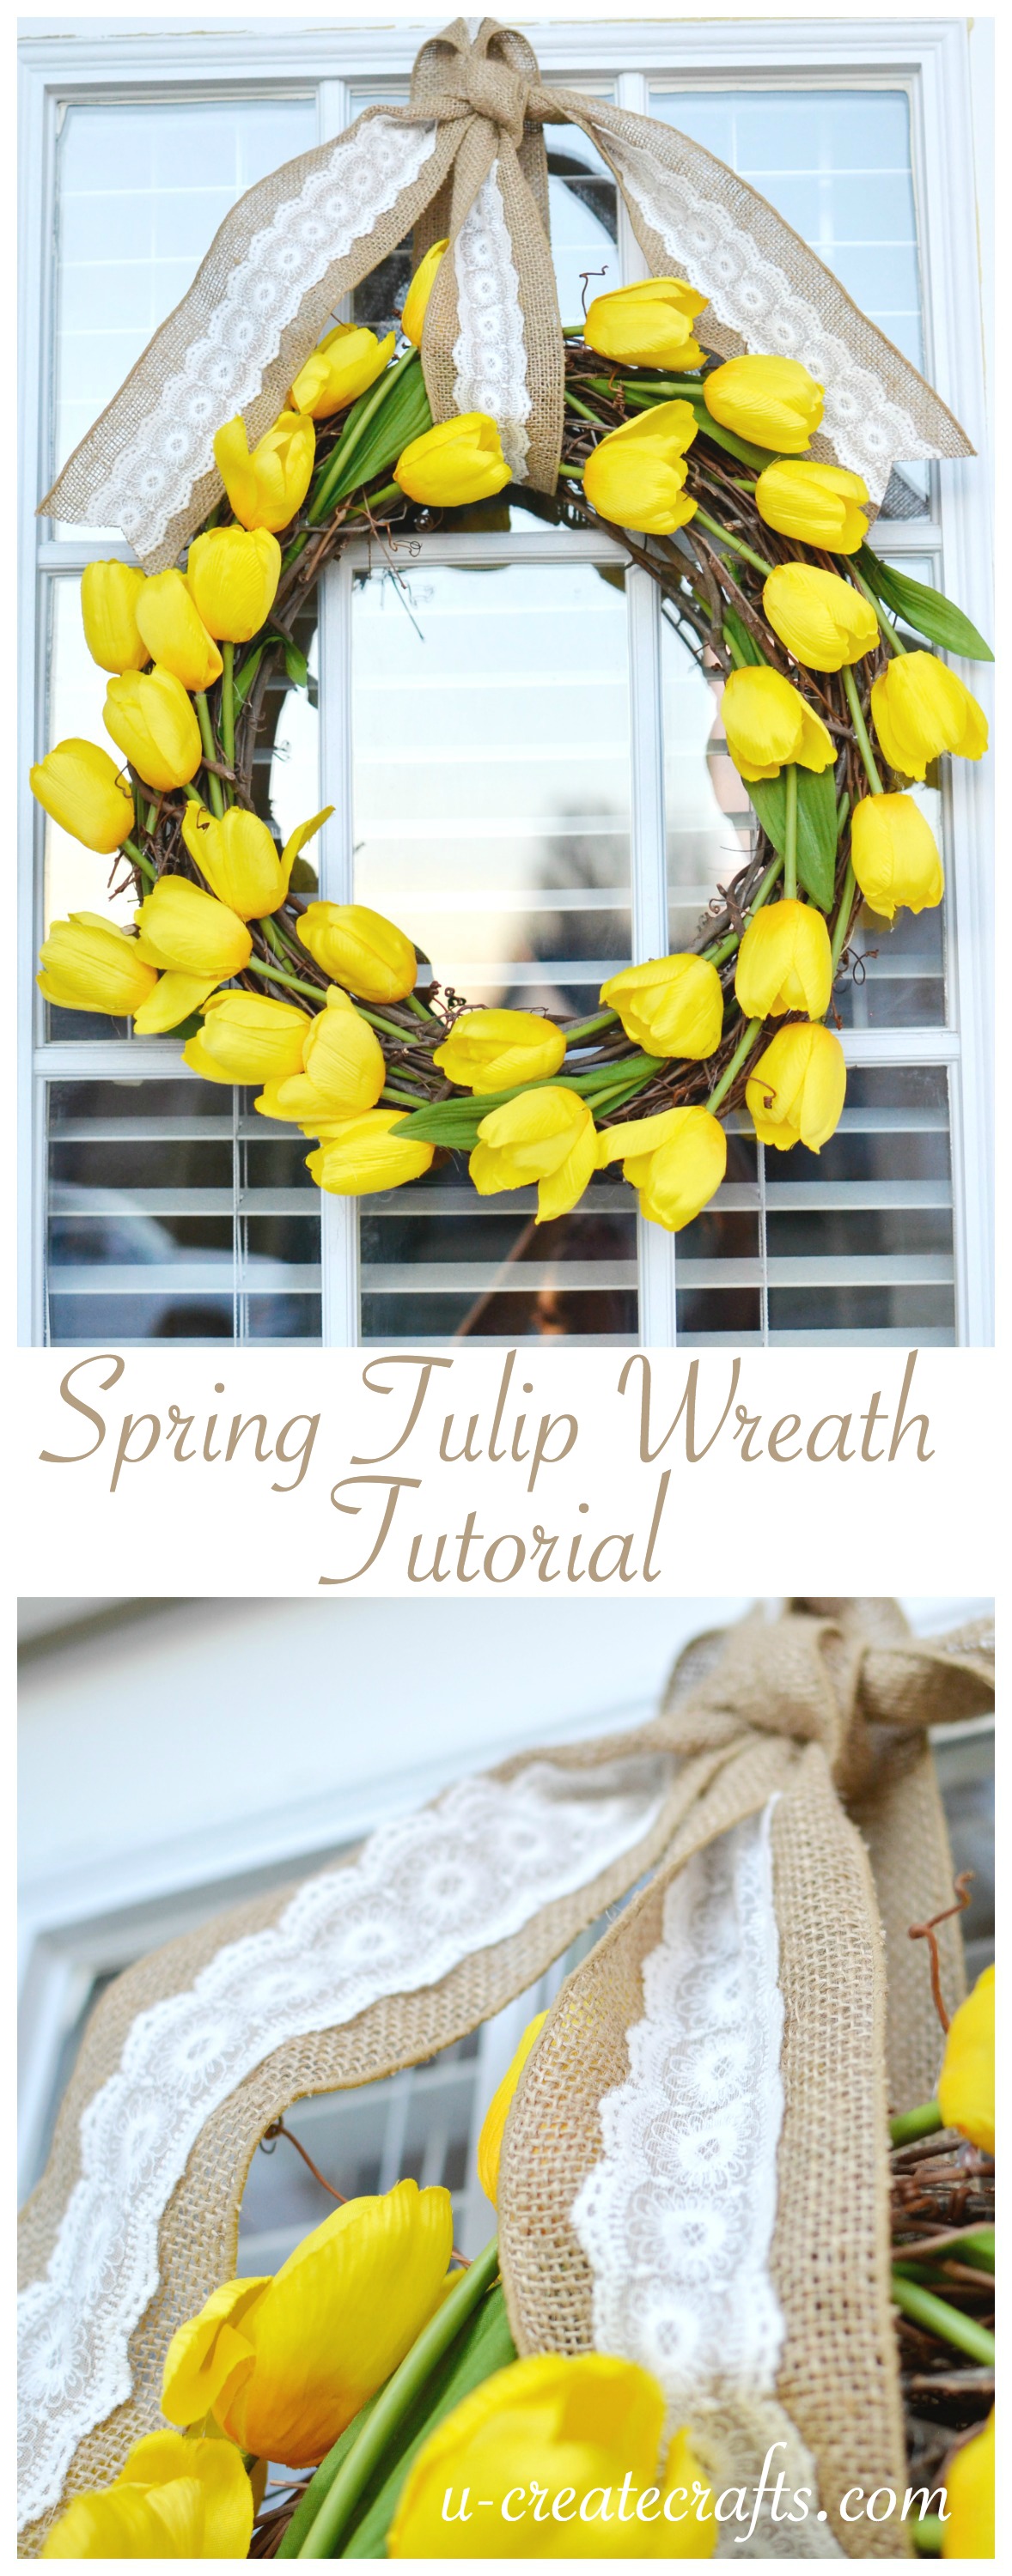 Spring Tulip Wreath Tutorial by U Create - create it in about 10 minutes!